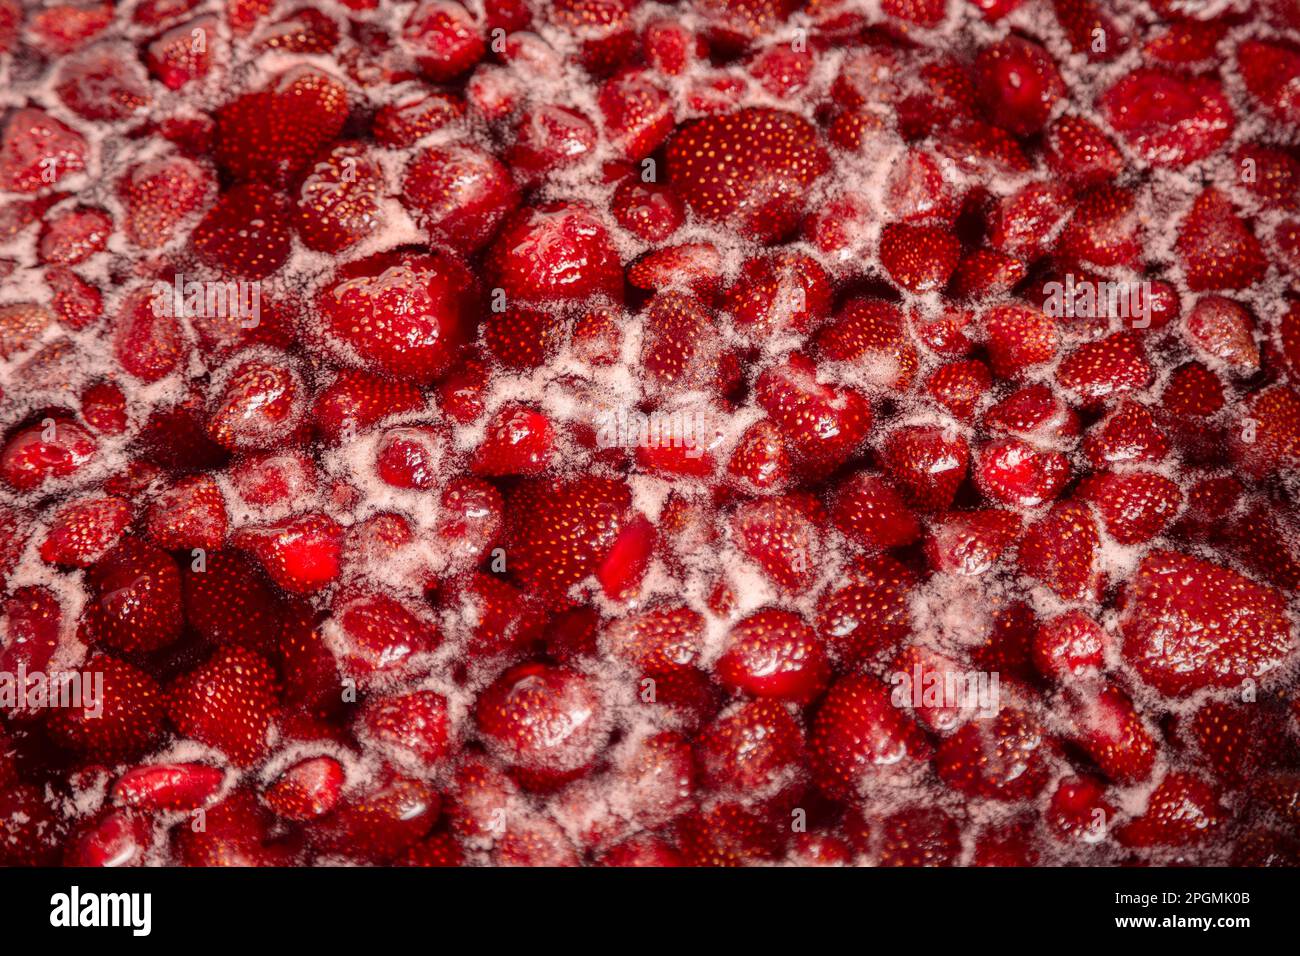 Process of making homemade raspberry jam. Red sweet syrup boiling on the stove closeup. Strawberry jam looks very appetizing. Boiling homemade strawberry jam. Make a strawberry jam. Stock Photo